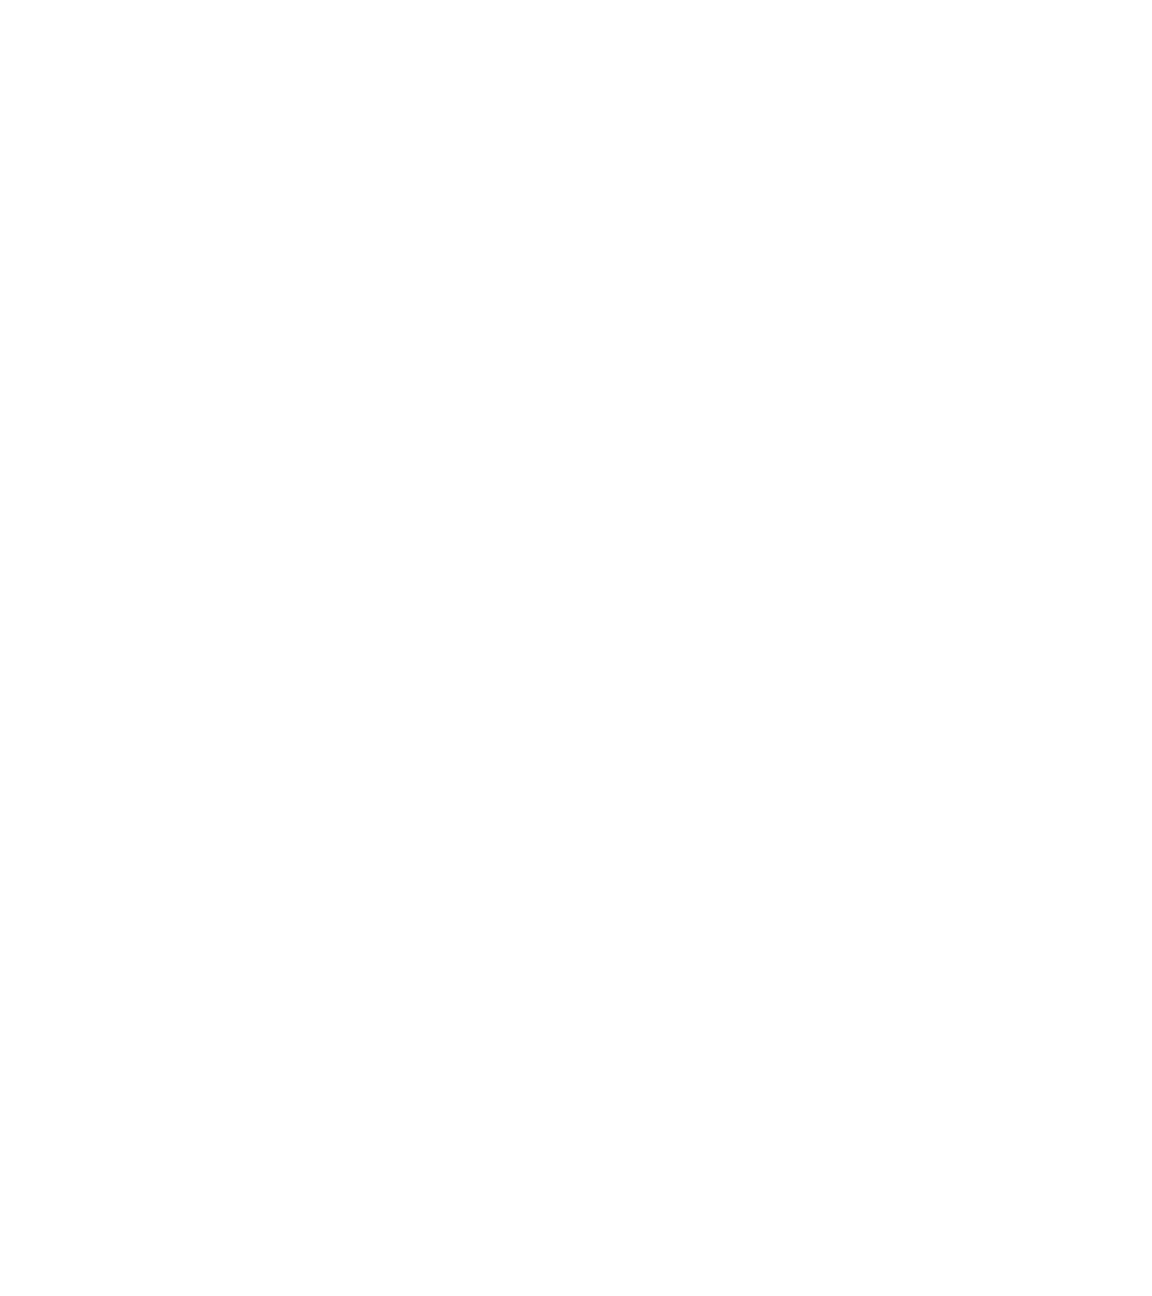 LMNT_STAY_SALTY_LOGO_black-2b703abe-c6fc-4958-a116-b4a1da02e2751.png